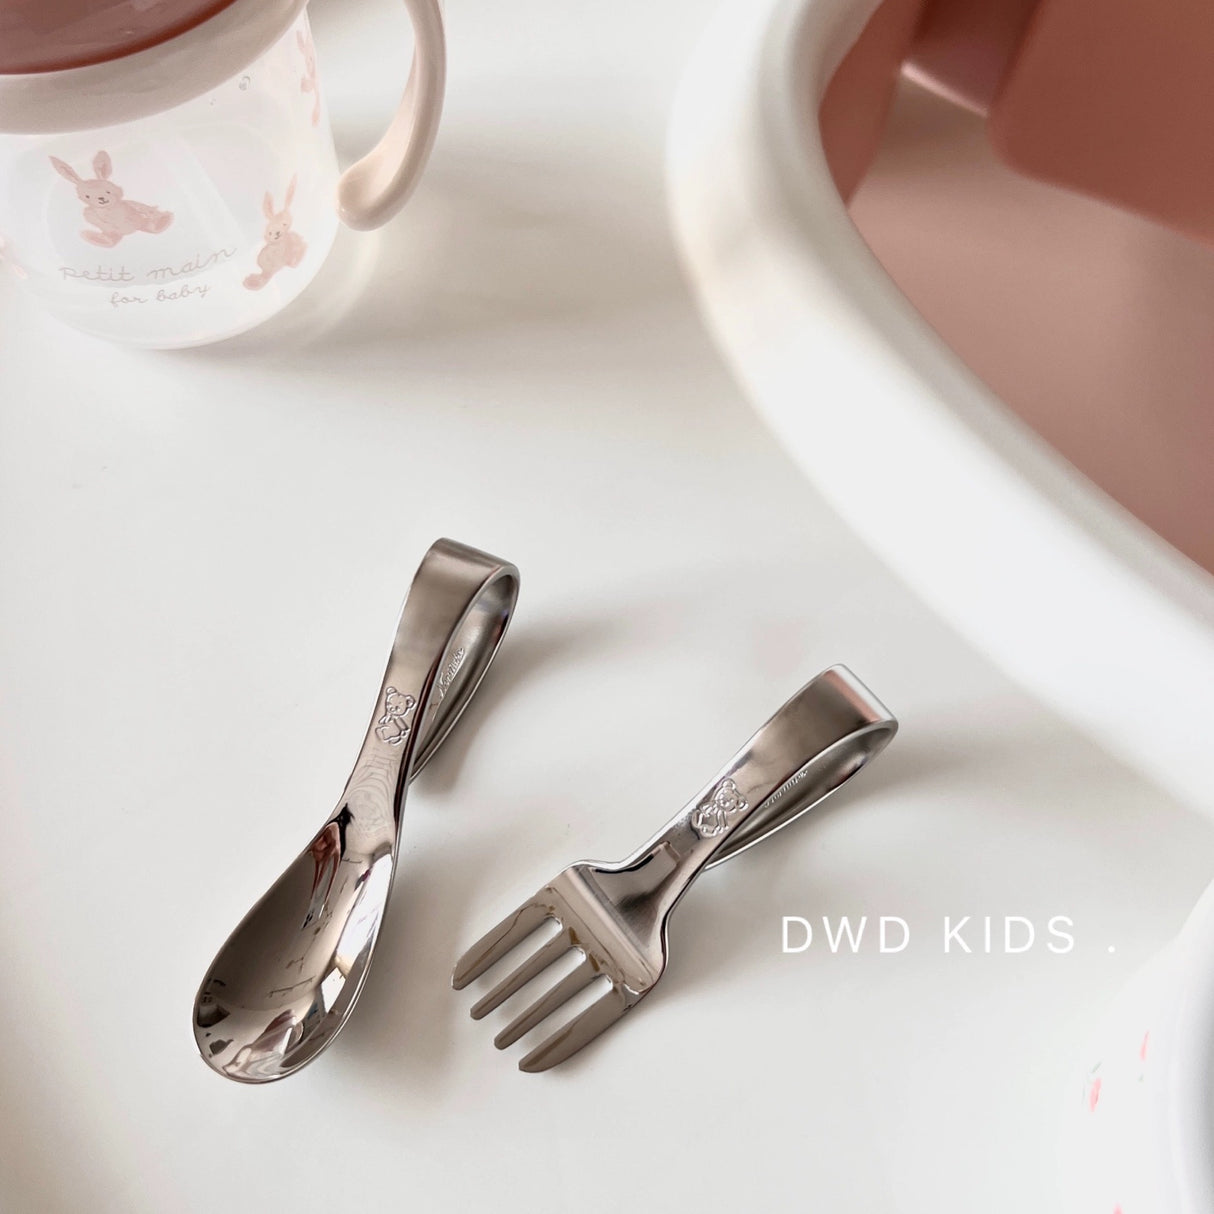 Baby spoon & fork that are easy to grip